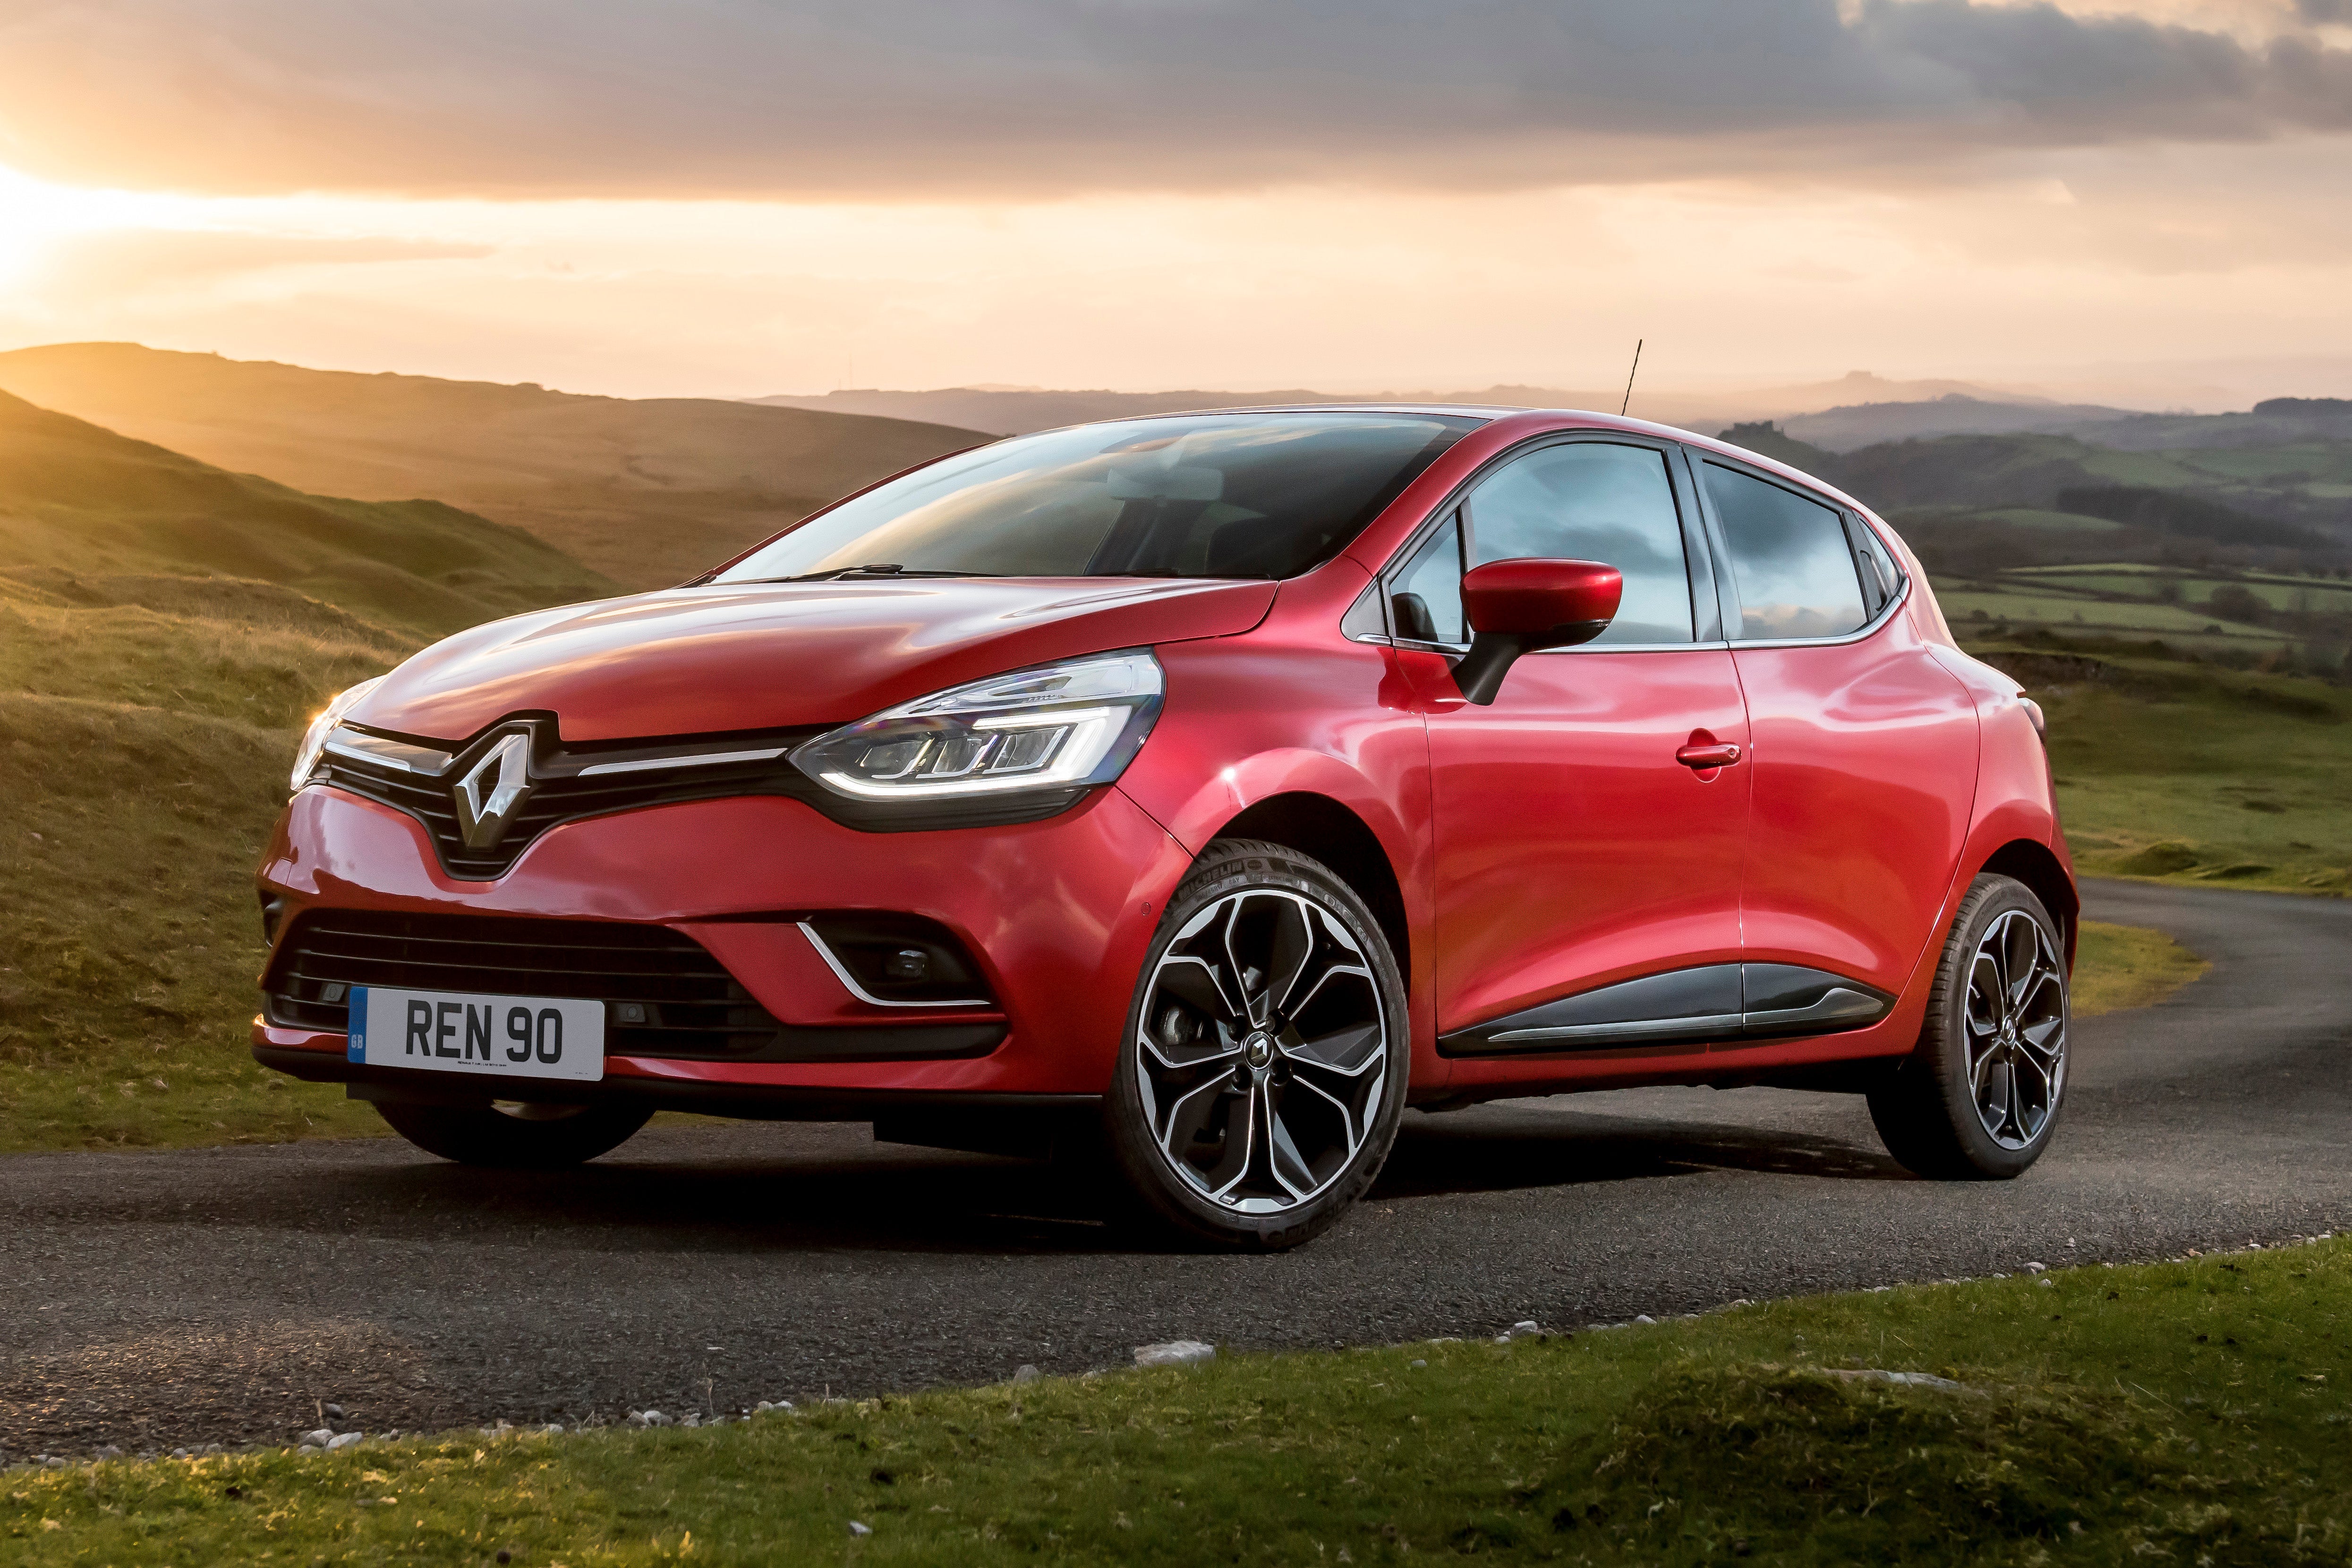 Renault Clio (2012 to 2019), Expert Rating